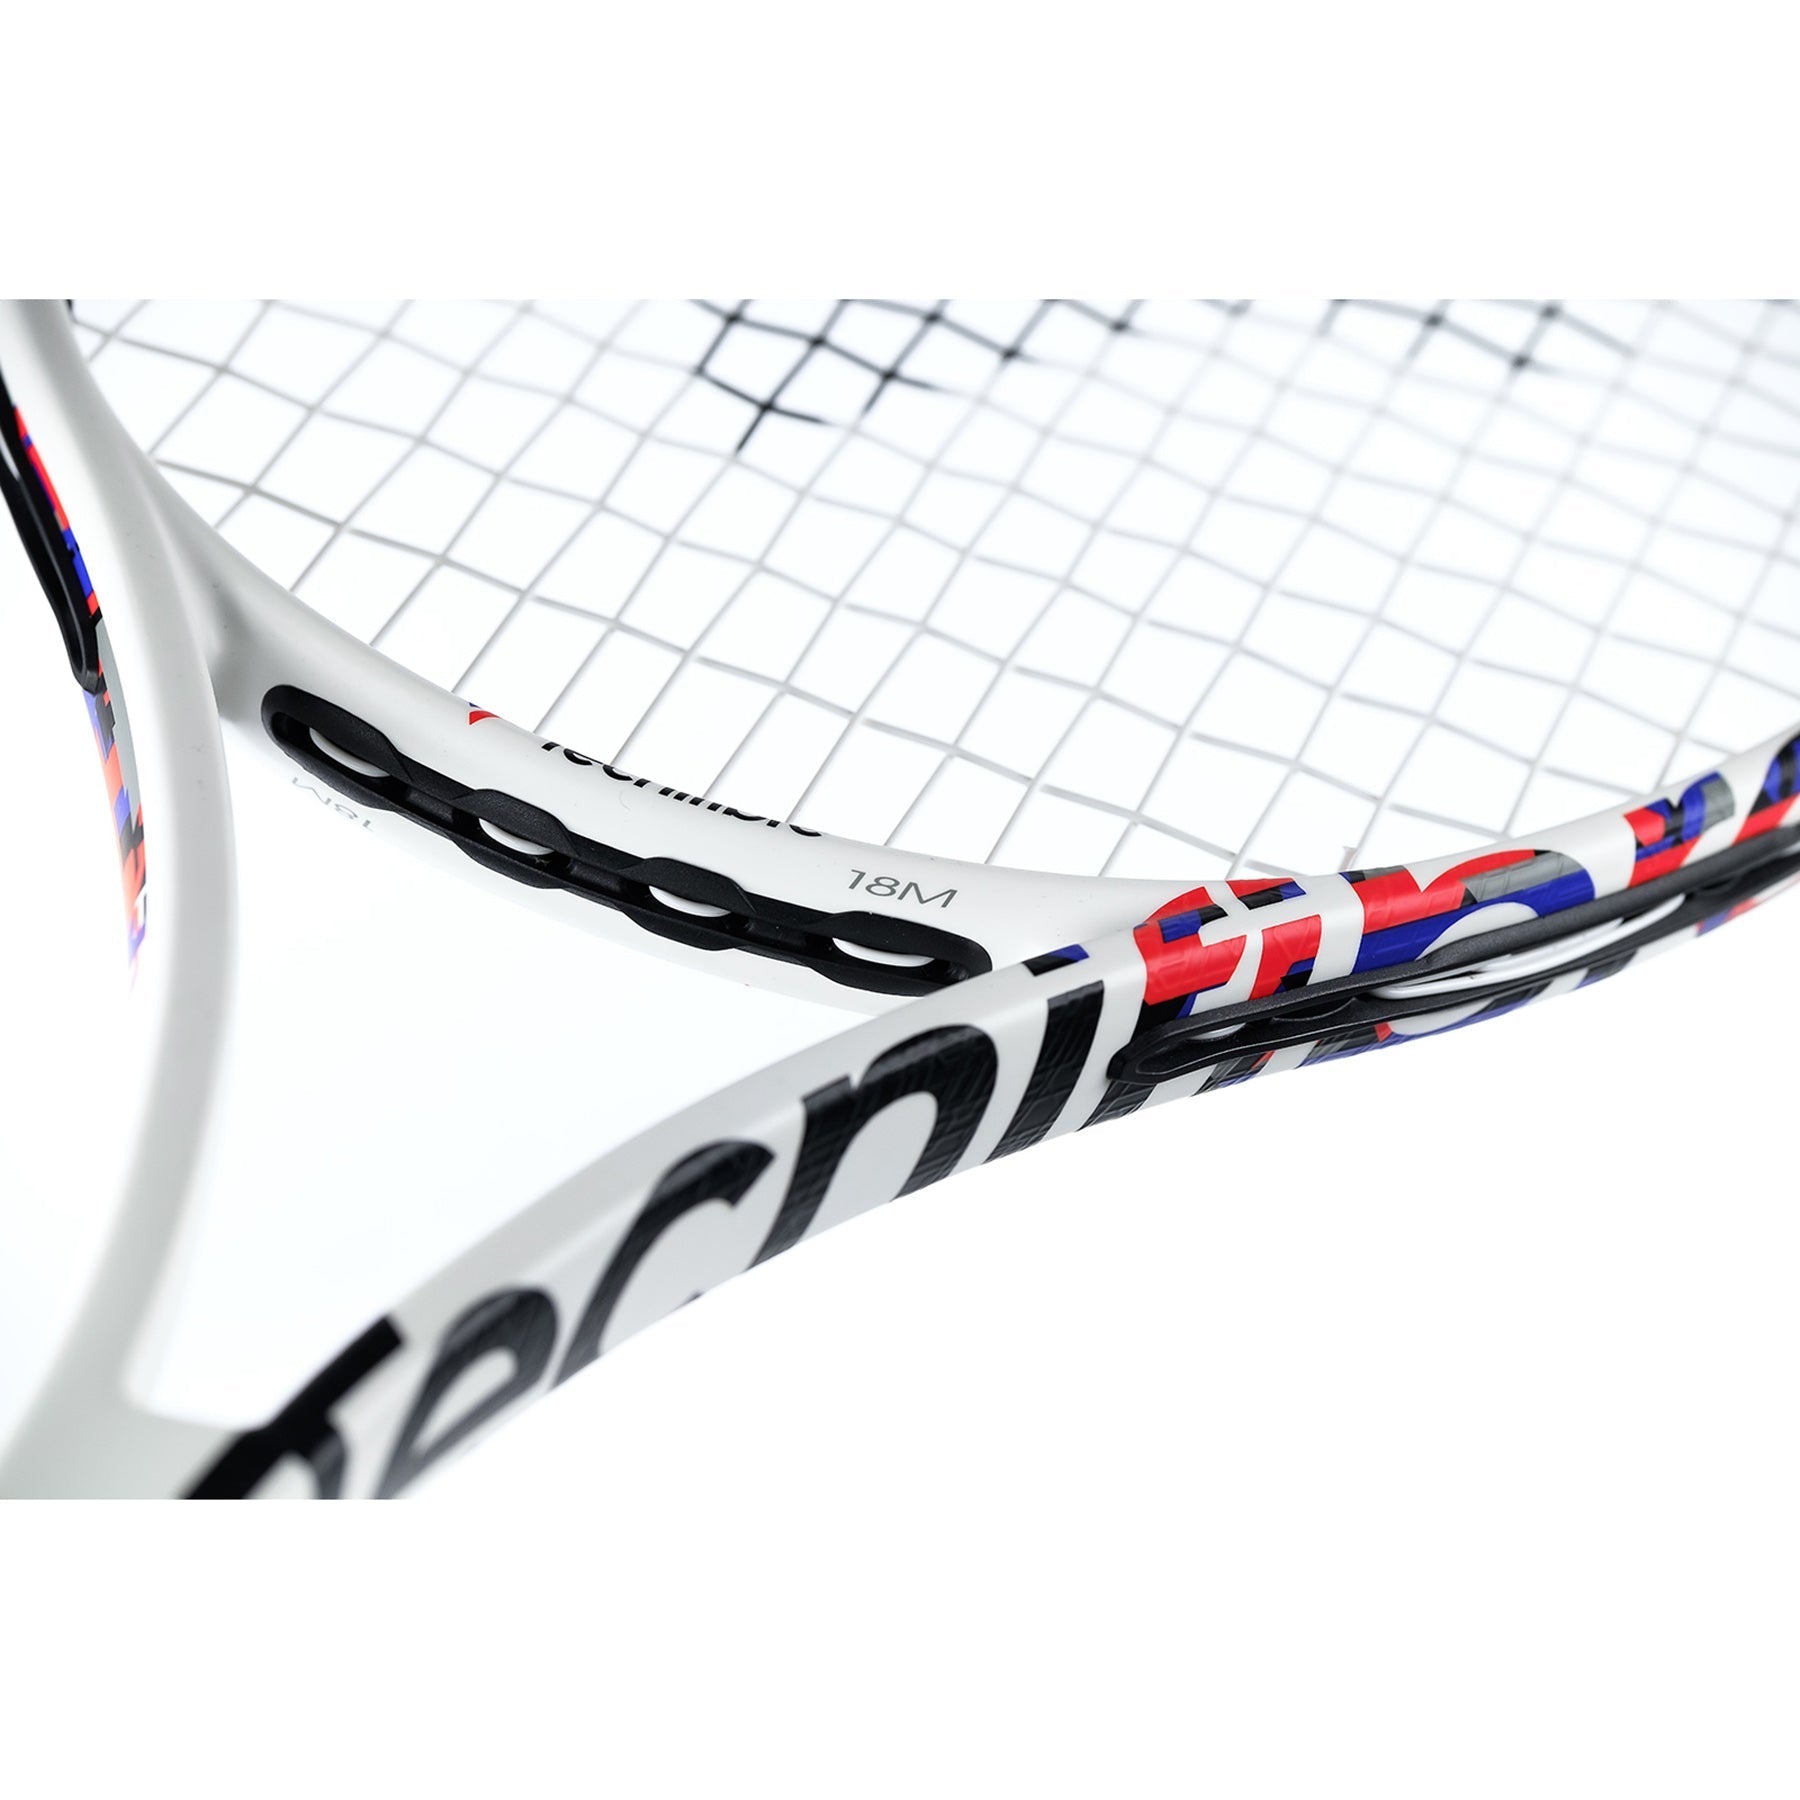 Close-up of the 18x20 string pattern of the TF40 305 tennis racket